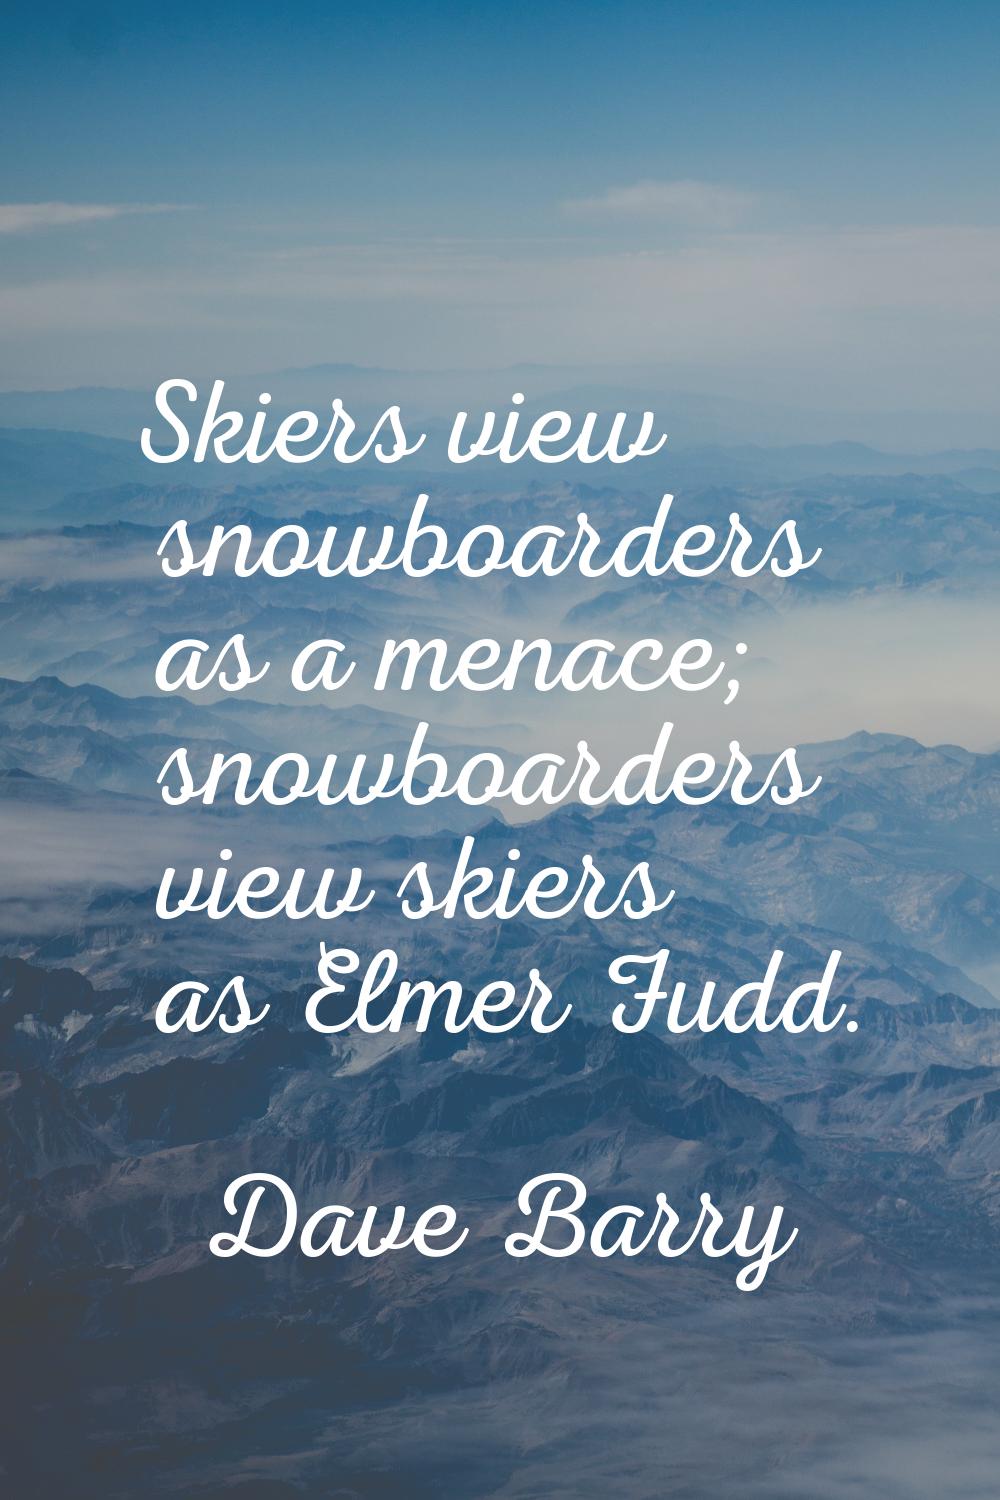 Skiers view snowboarders as a menace; snowboarders view skiers as Elmer Fudd.